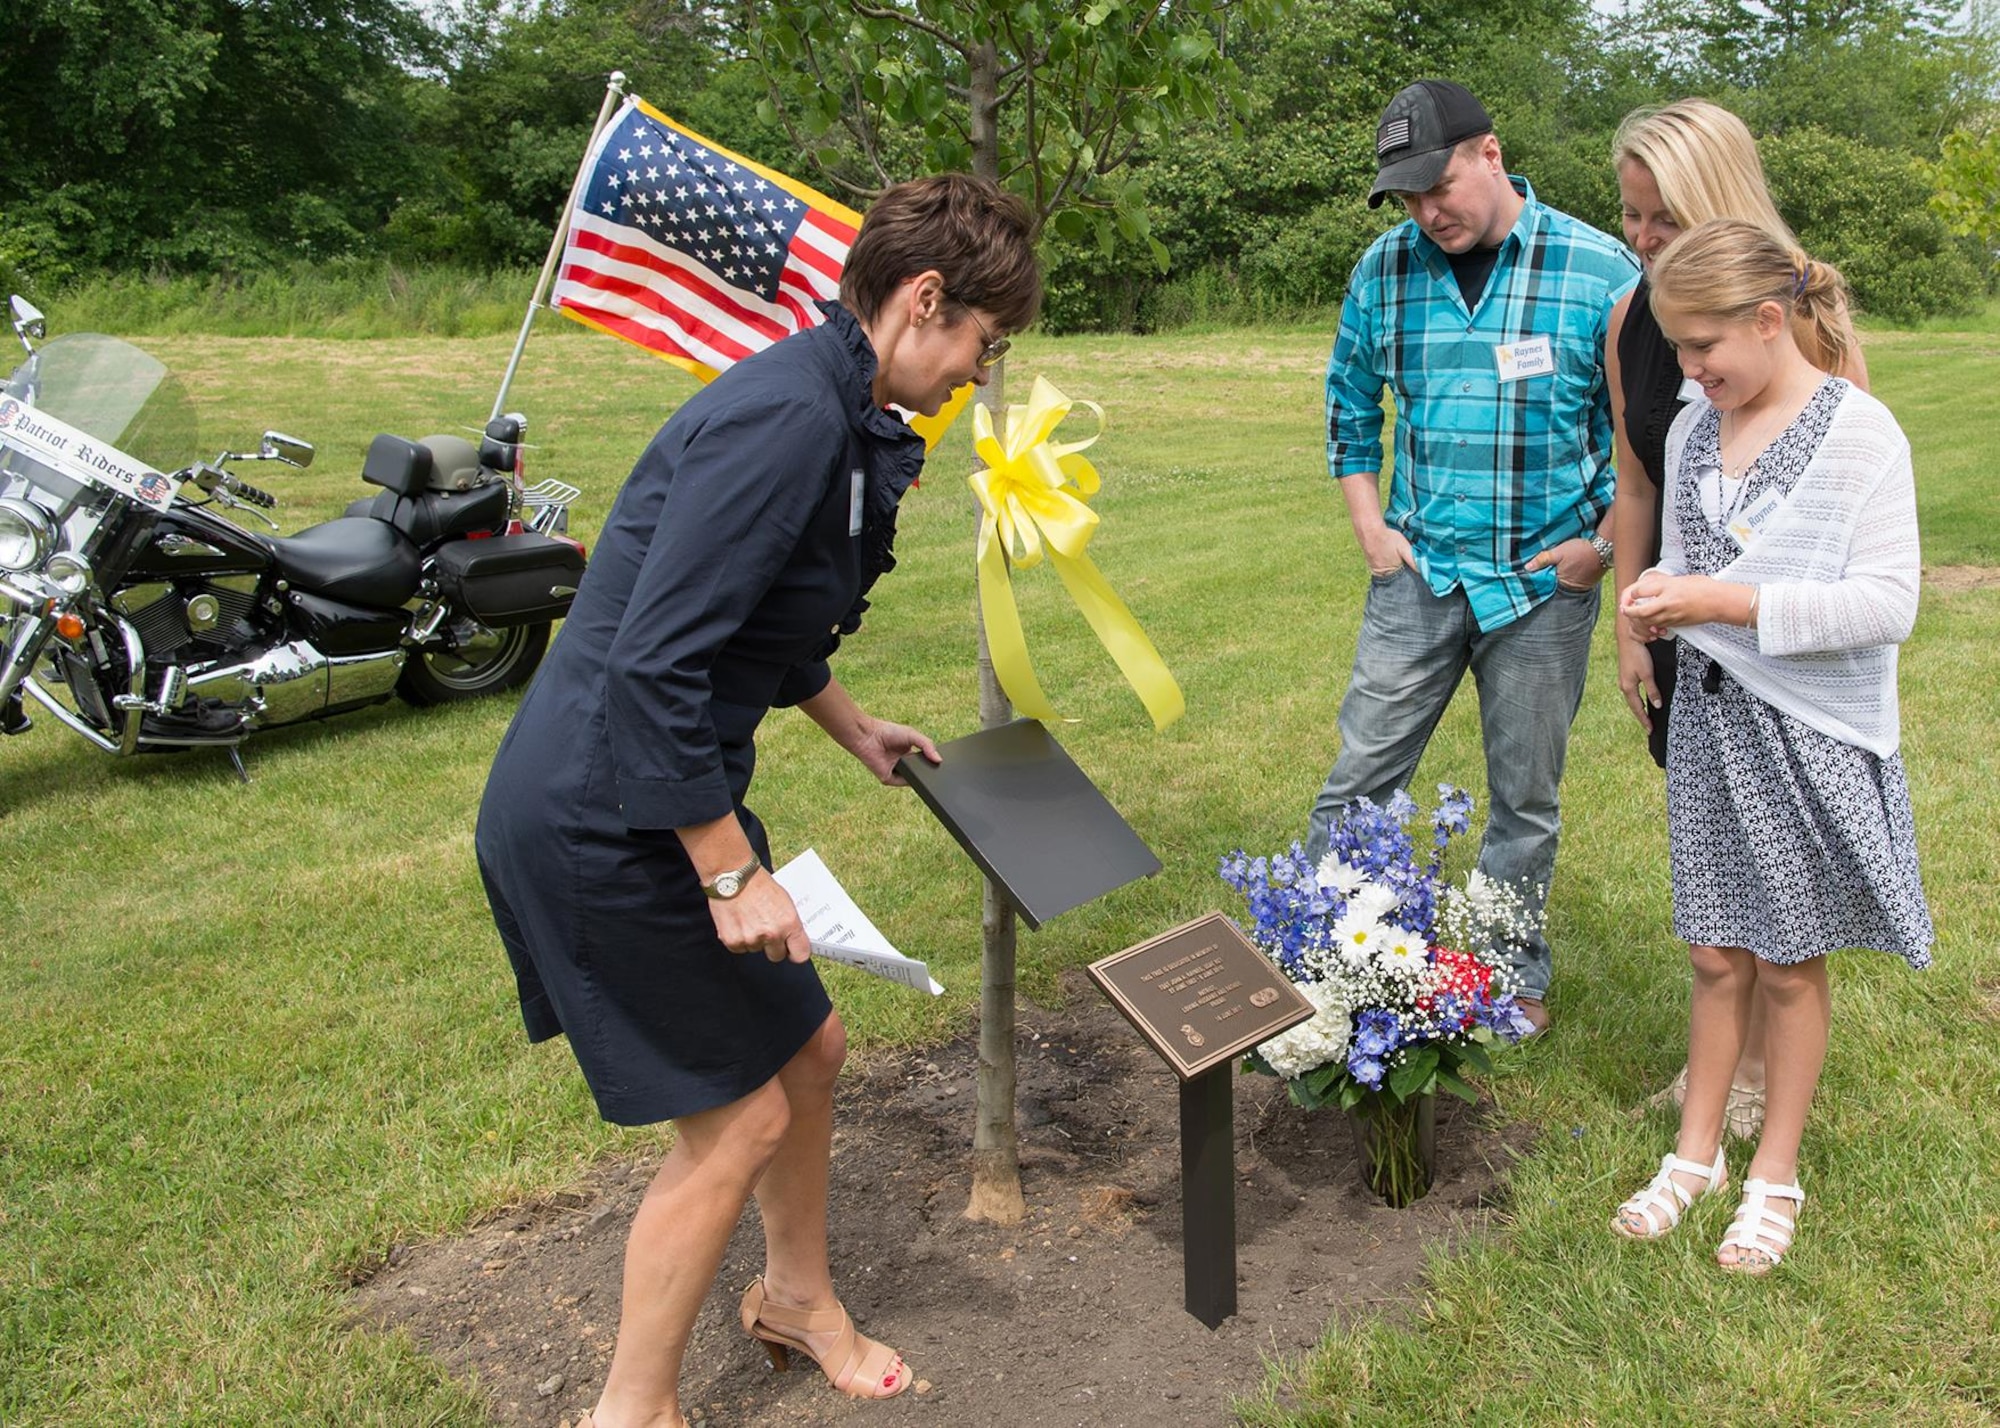 Shelly Raynes unveils a plaque in front of a tree dedicated to her late husband, retired Tech. Sgt. John A Raynes, during a Memorial Park Dedication Ceremony at Hanscom Air Force Base, Mass., June 16, while John Jr., Ashley and Hannah Grace look on. Raynes worked for Security Forces, Public Affairs and Civil Engineering during his tenure at Hanscom. Also honored during the event was Dana E. Kirane and Dennis “Dennie” Guthrie. (U.S. Air Force photo by Jerry Saslav)